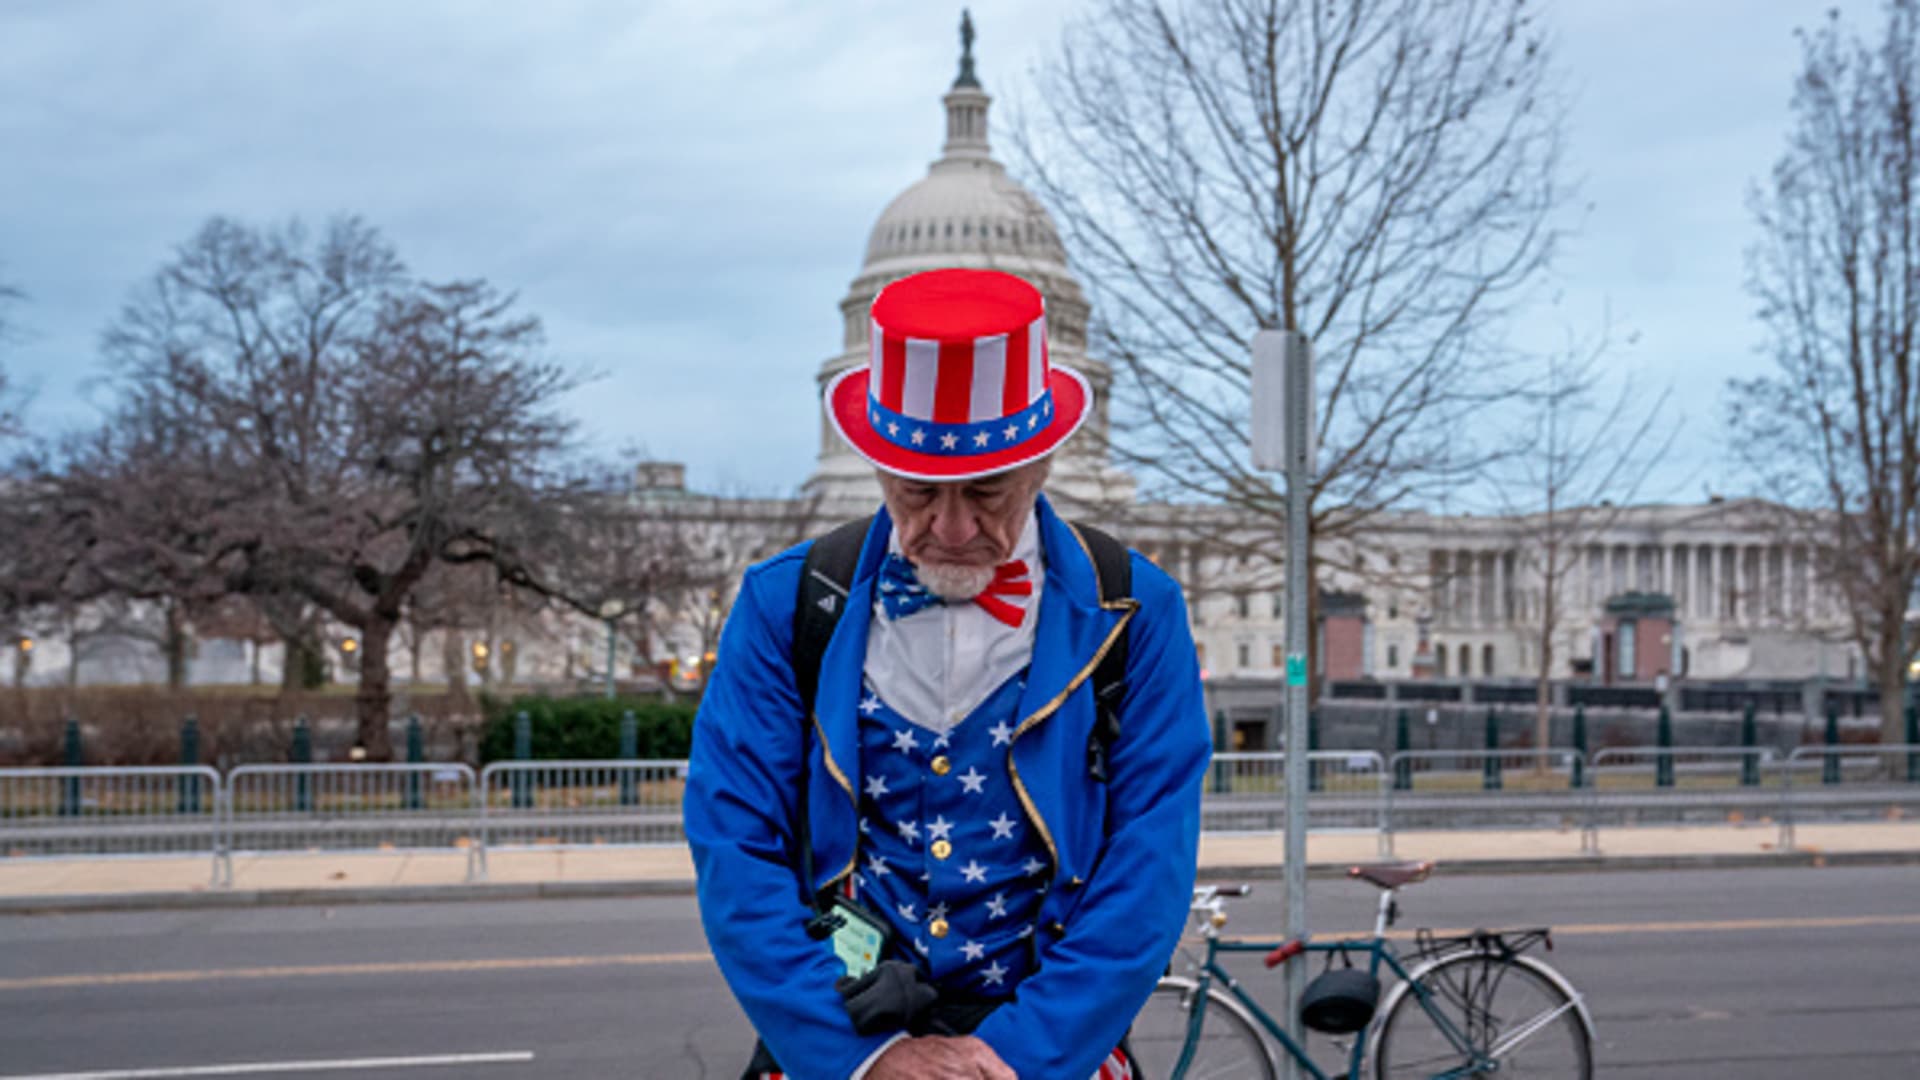 A man dressed as Uncle Sam, who's a regular attendee of events held by former President Donald Trump, stops to pray near community faith leaders during a vigil on the second anniversary of the January 6 attack on the Capitol on January 6, 2023 in Washington, DC.